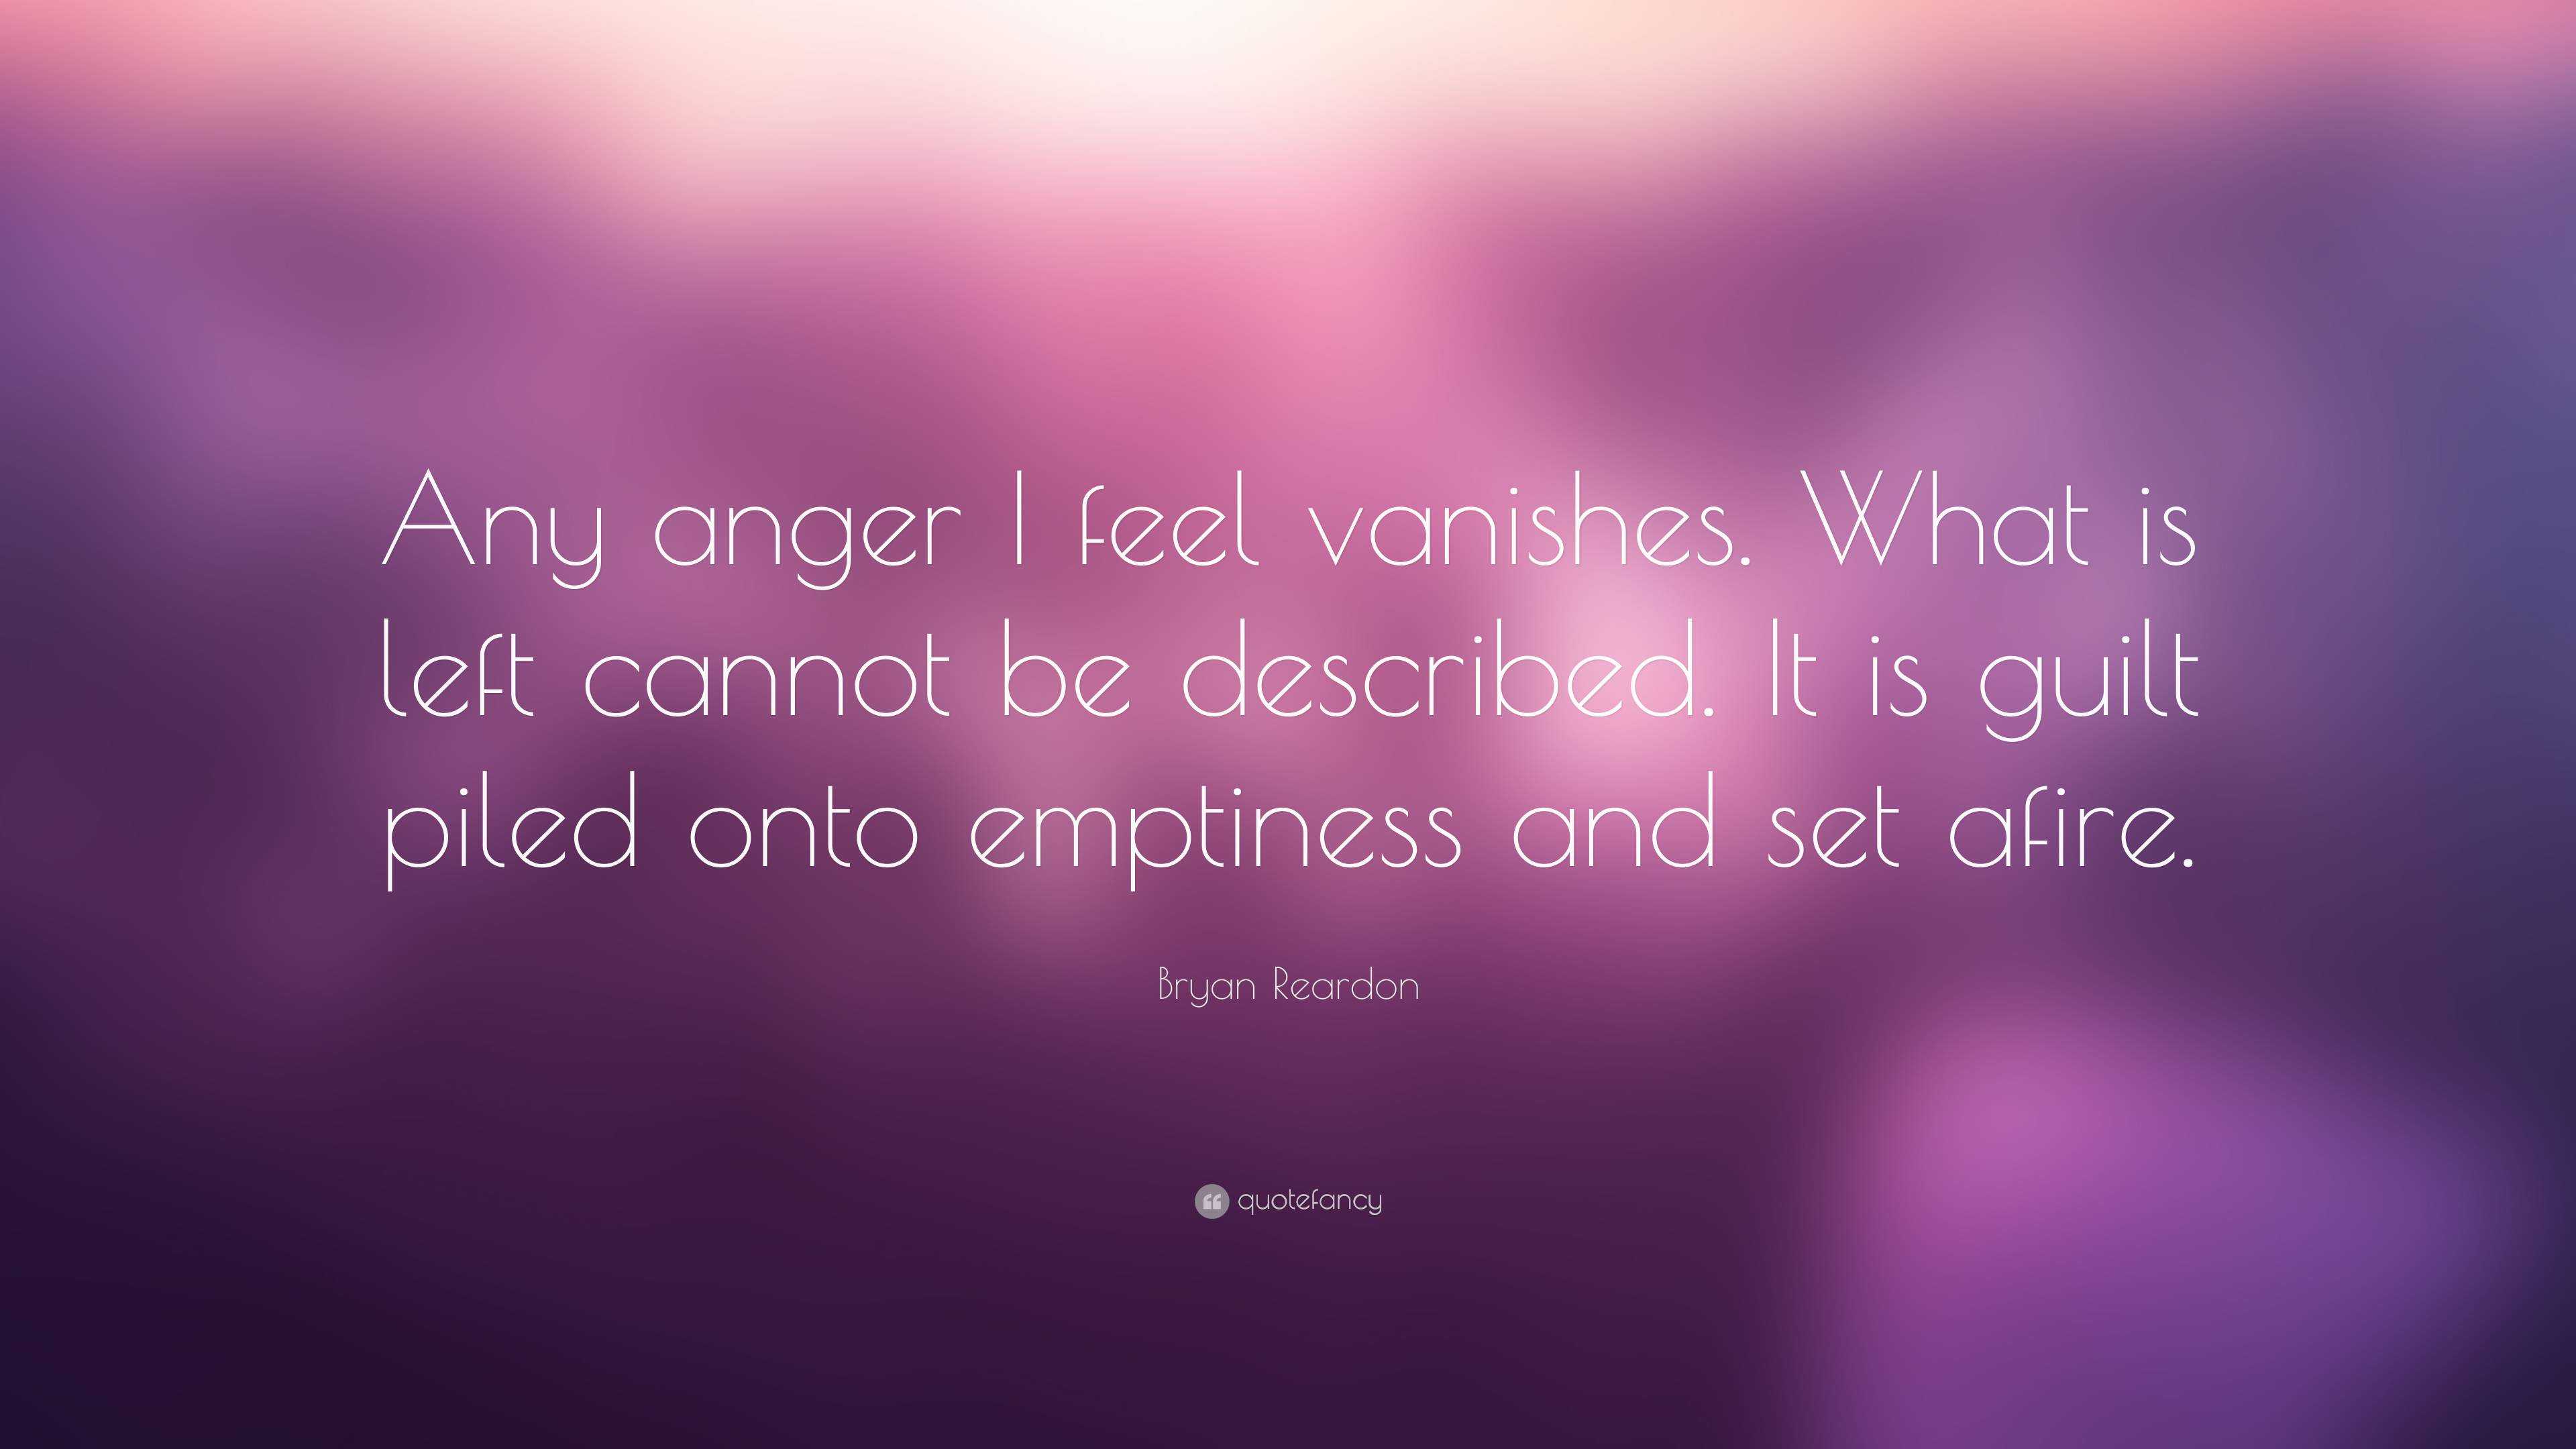 Bryan Reardon Quote: “Any anger I feel vanishes. What is left cannot be  described. It is